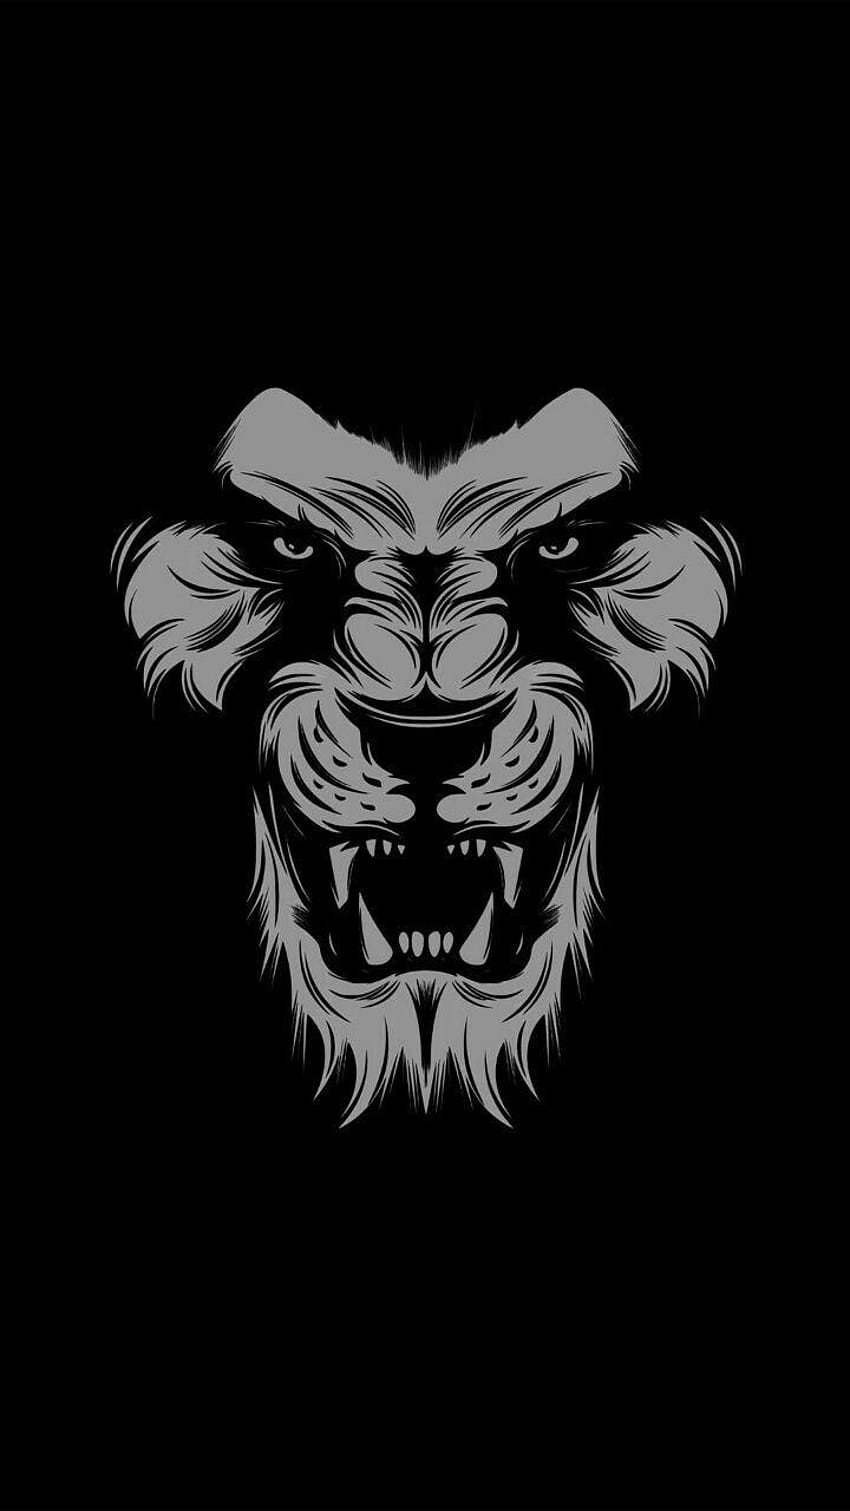 1440x900 Dark Black Lion Illustration 1440x900 Resolution HD 4k Wallpapers  Images Backgrounds Photos and Pictures